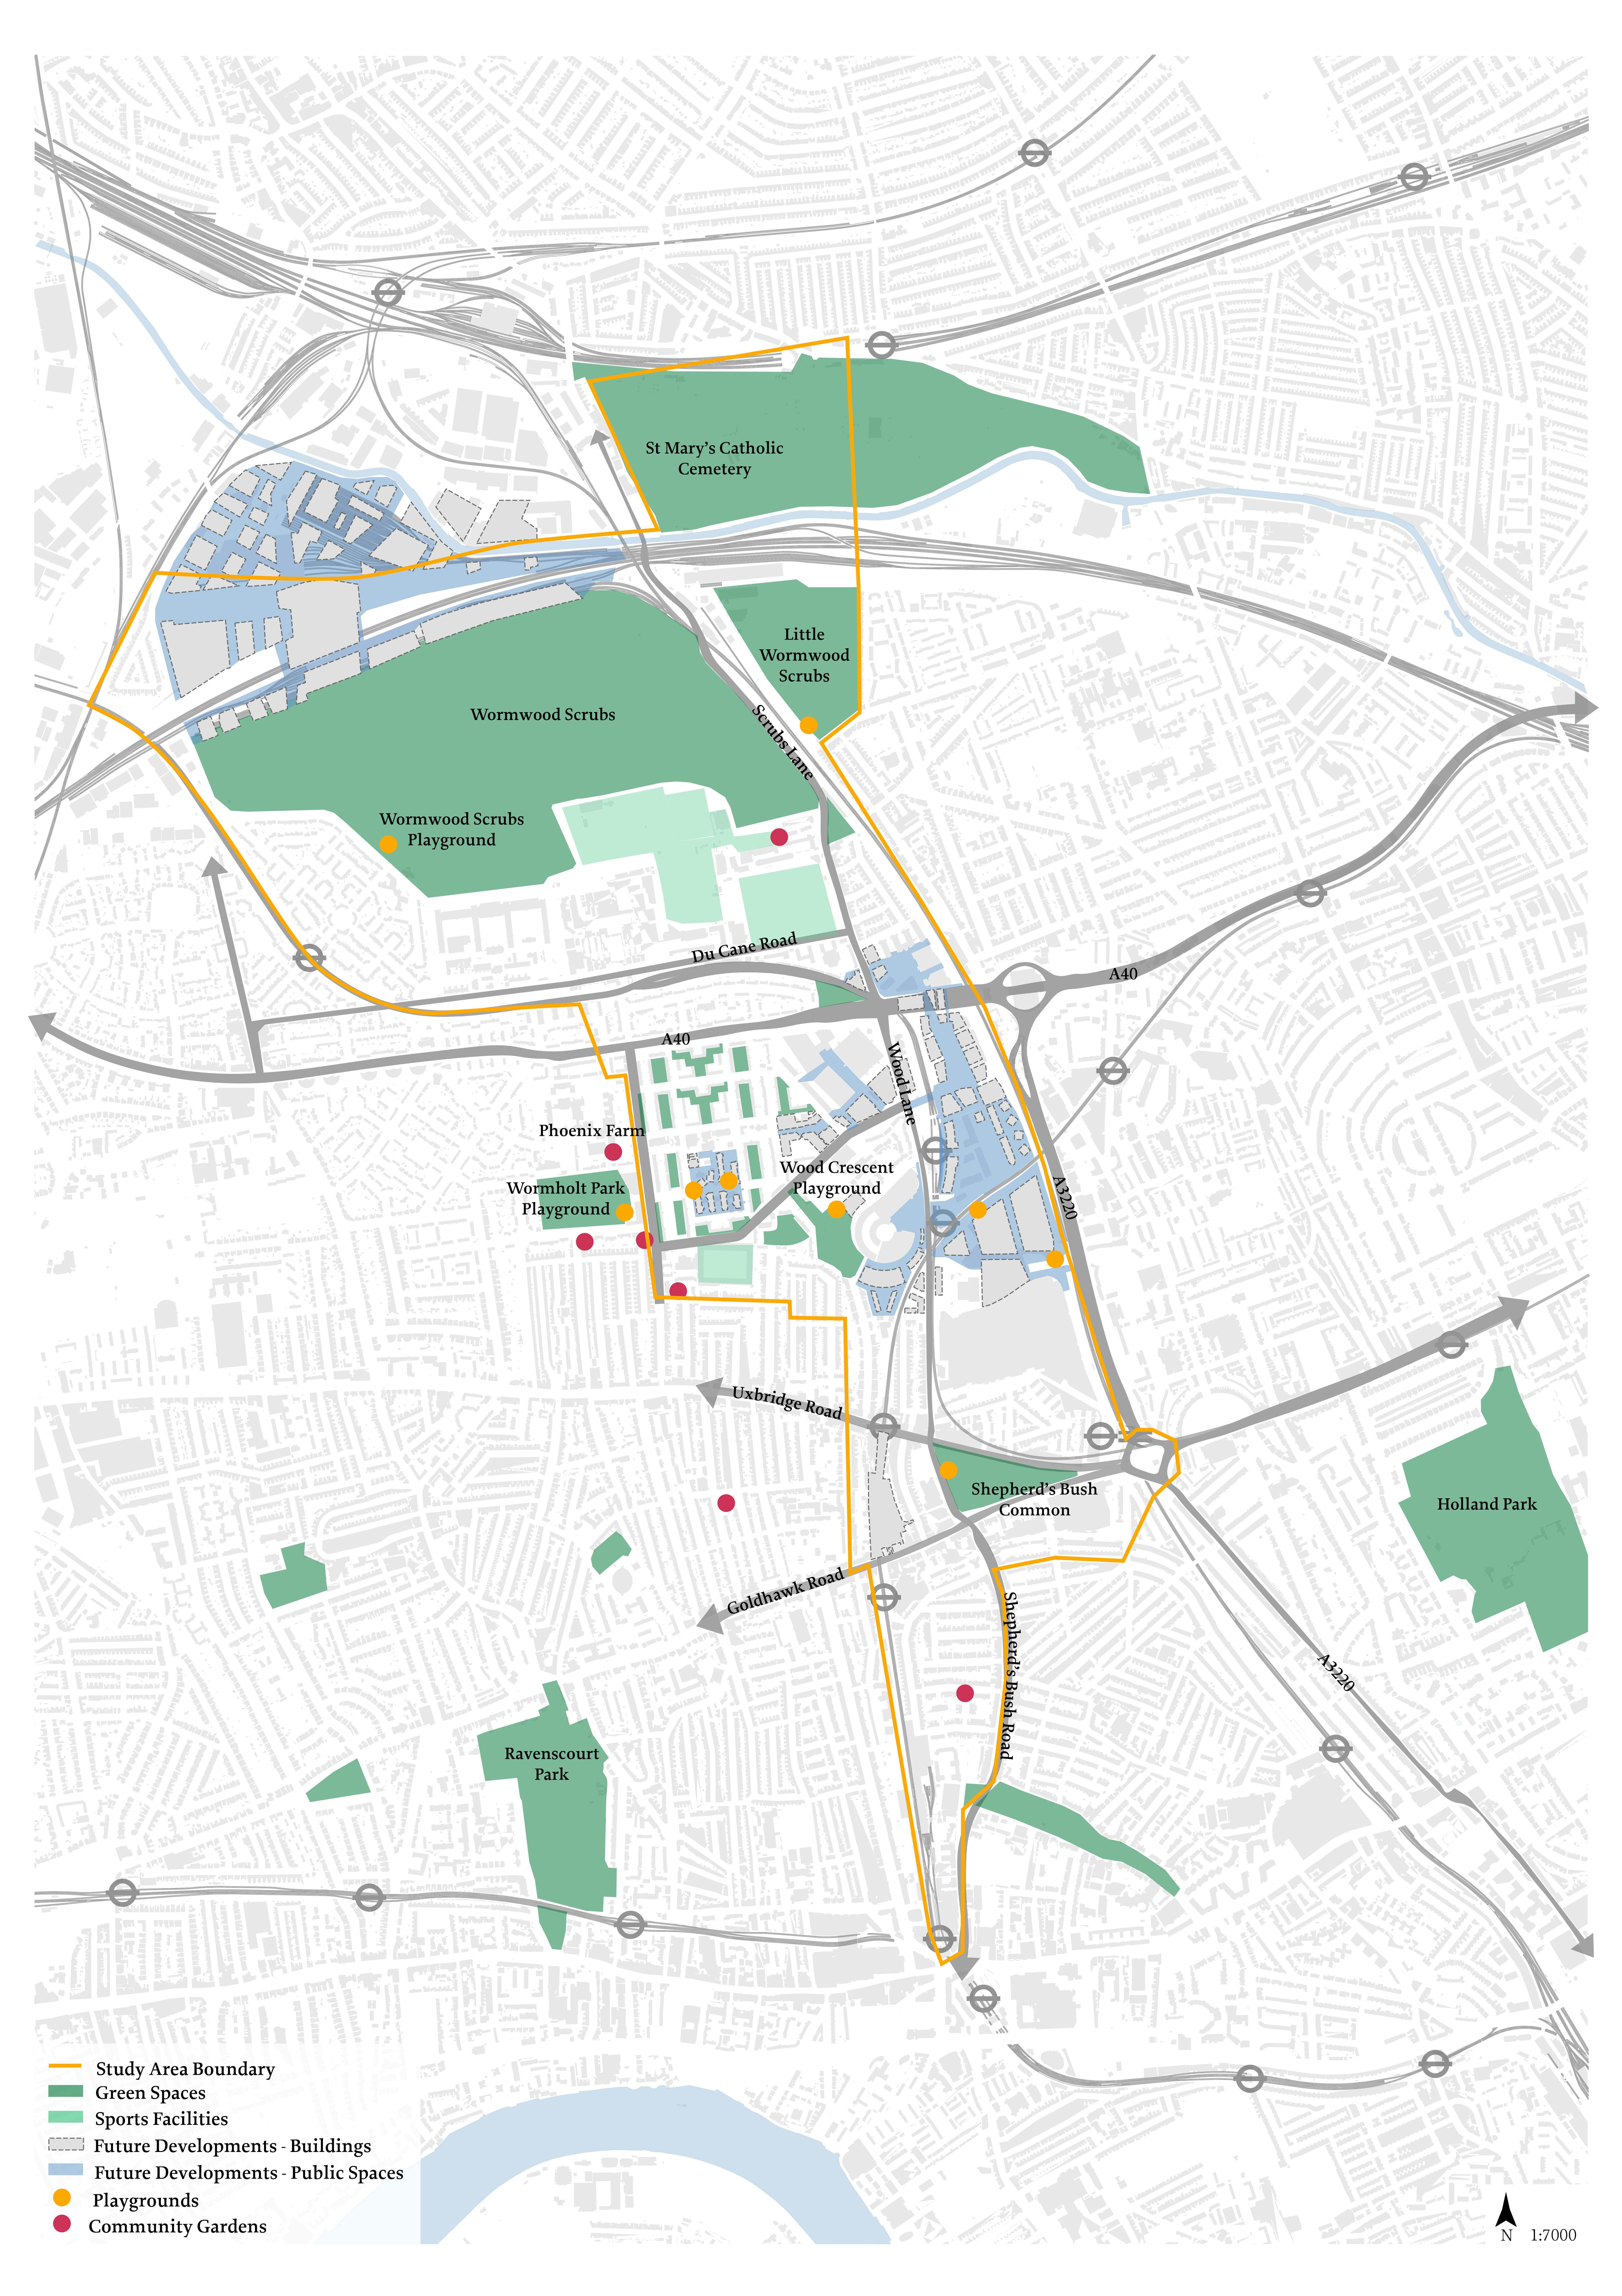 Map of the area with playgrounds and community garden marked on it